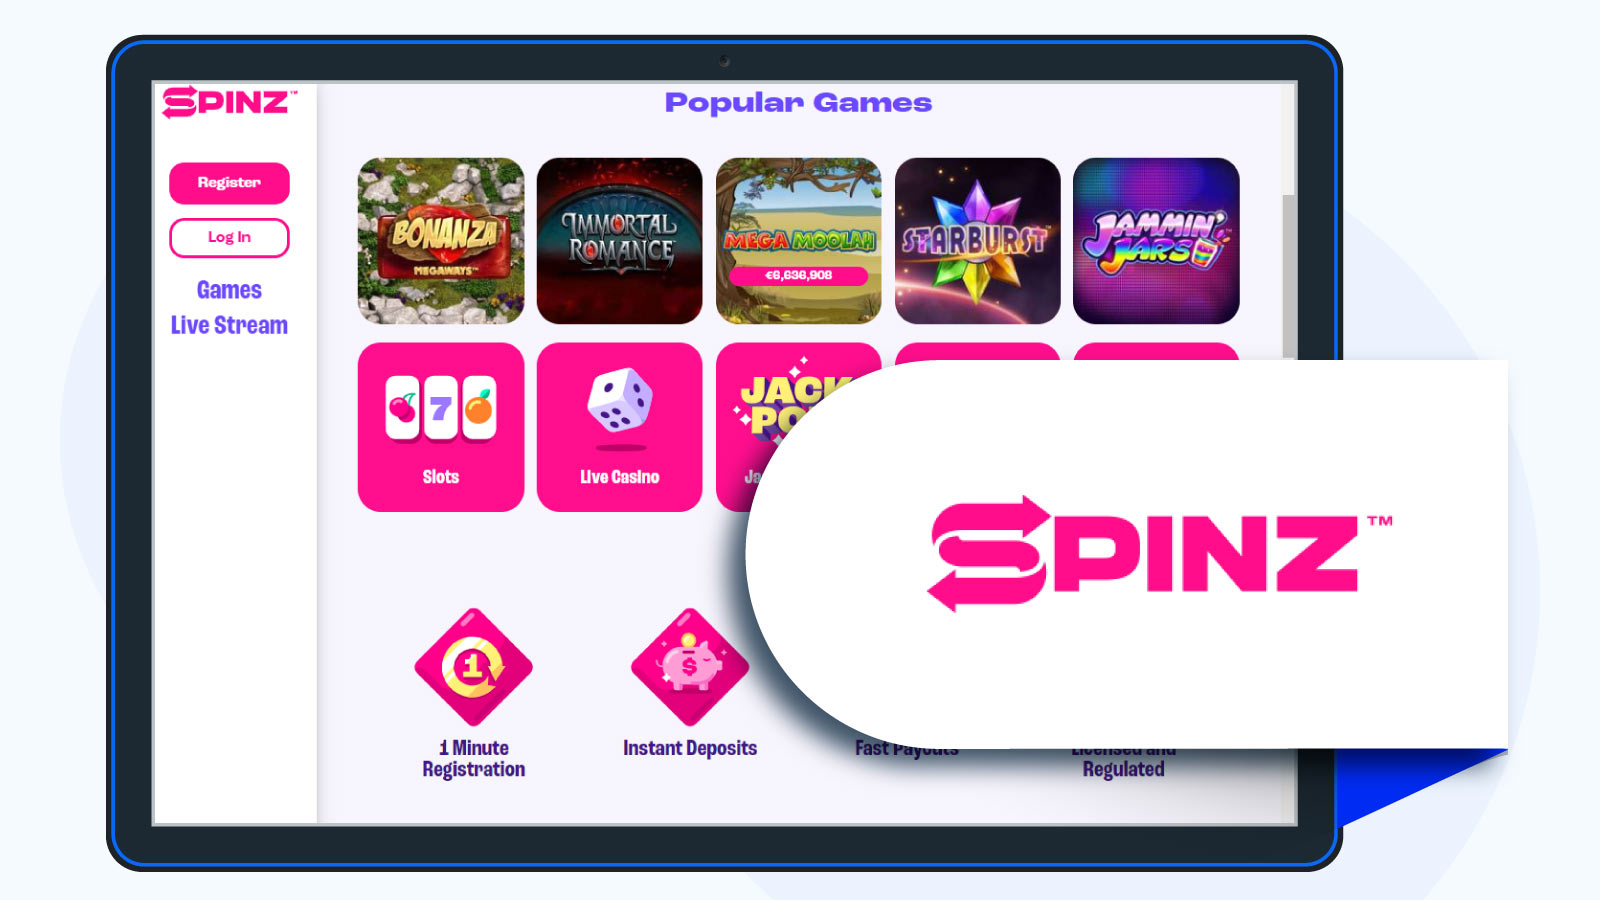 Spinz 5th place on our best pokie sites list